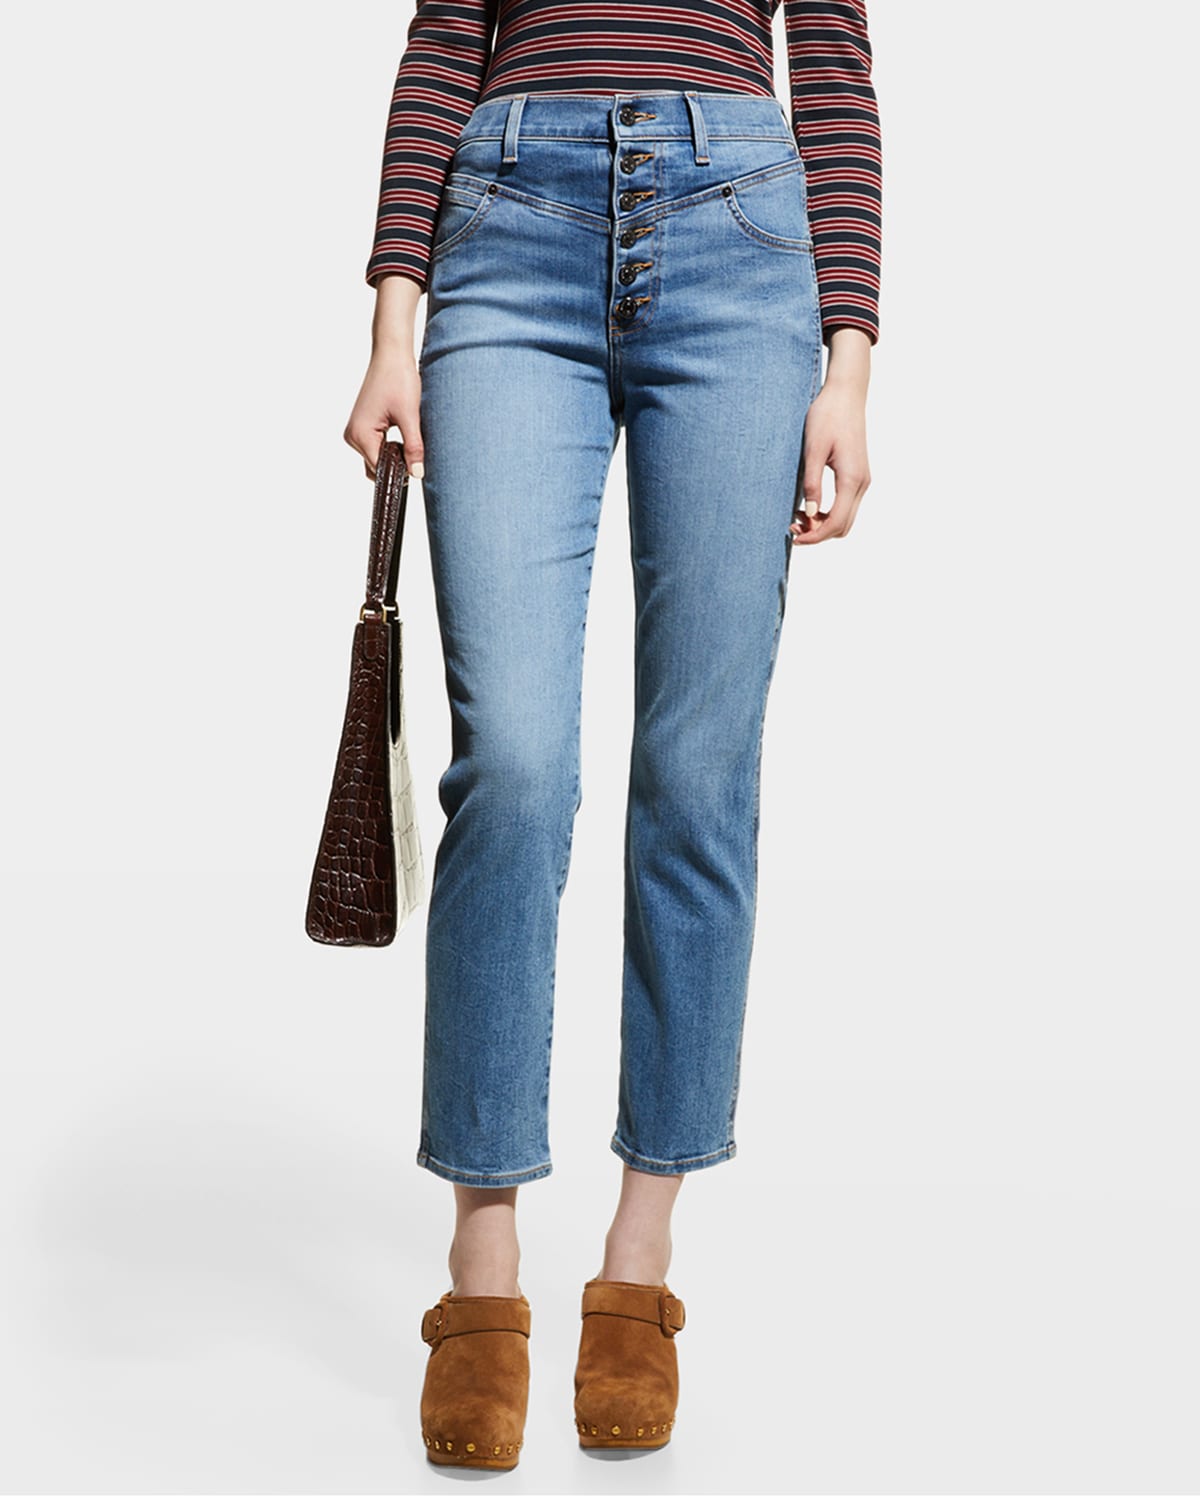 Ryleigh Seamed Straight Ankle Jeans